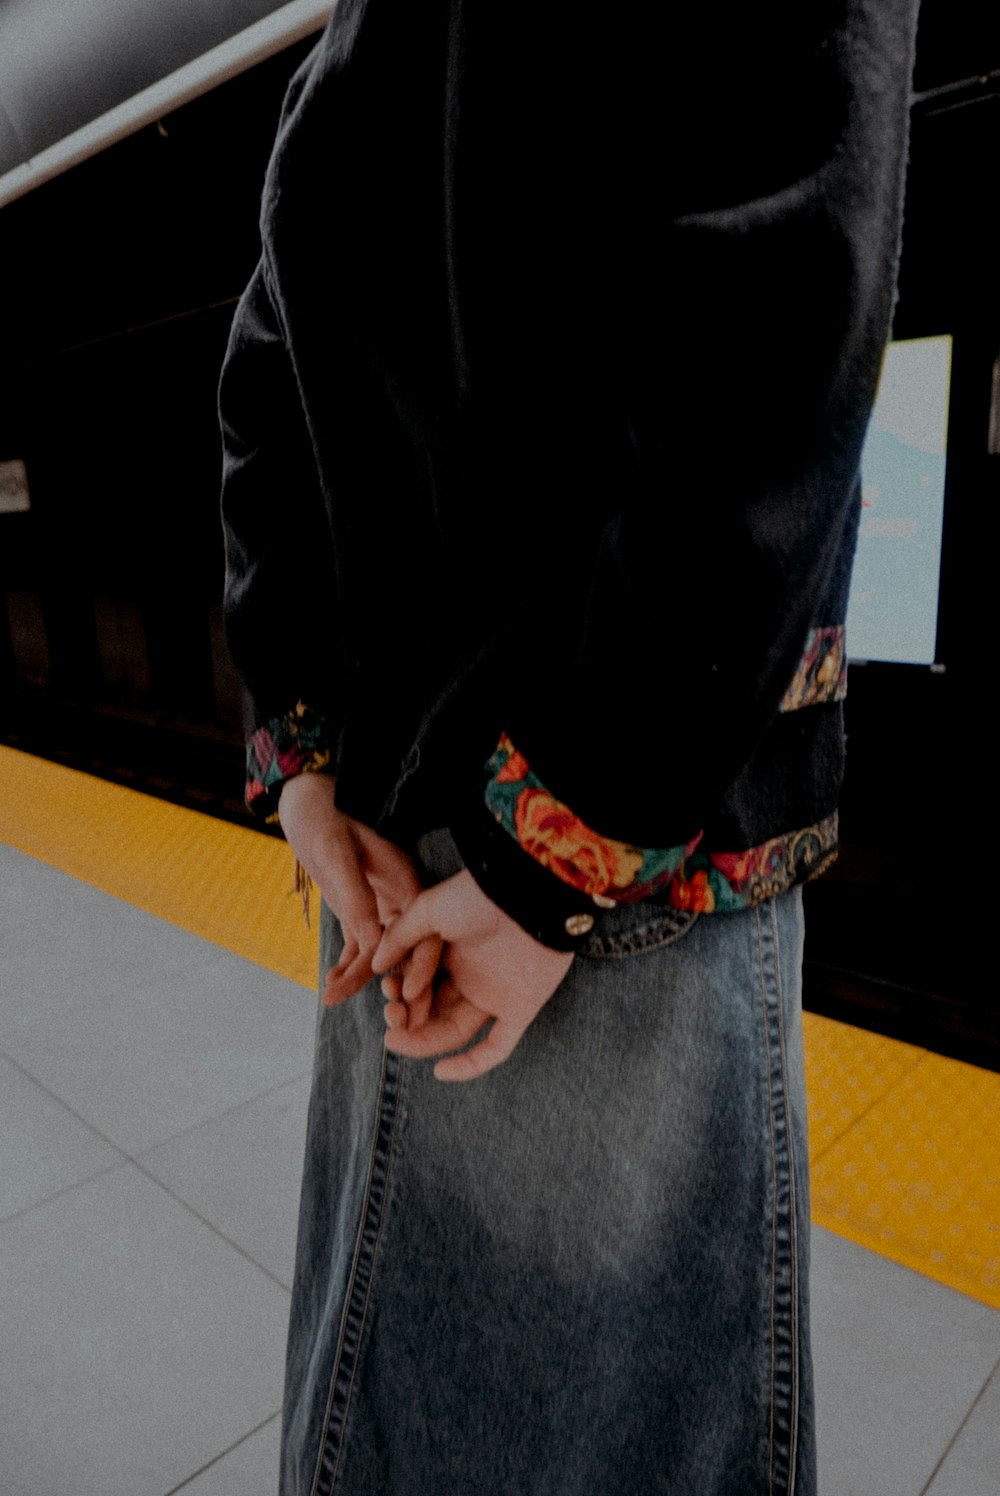 a person standing on a subway platform with their hands in their pockets